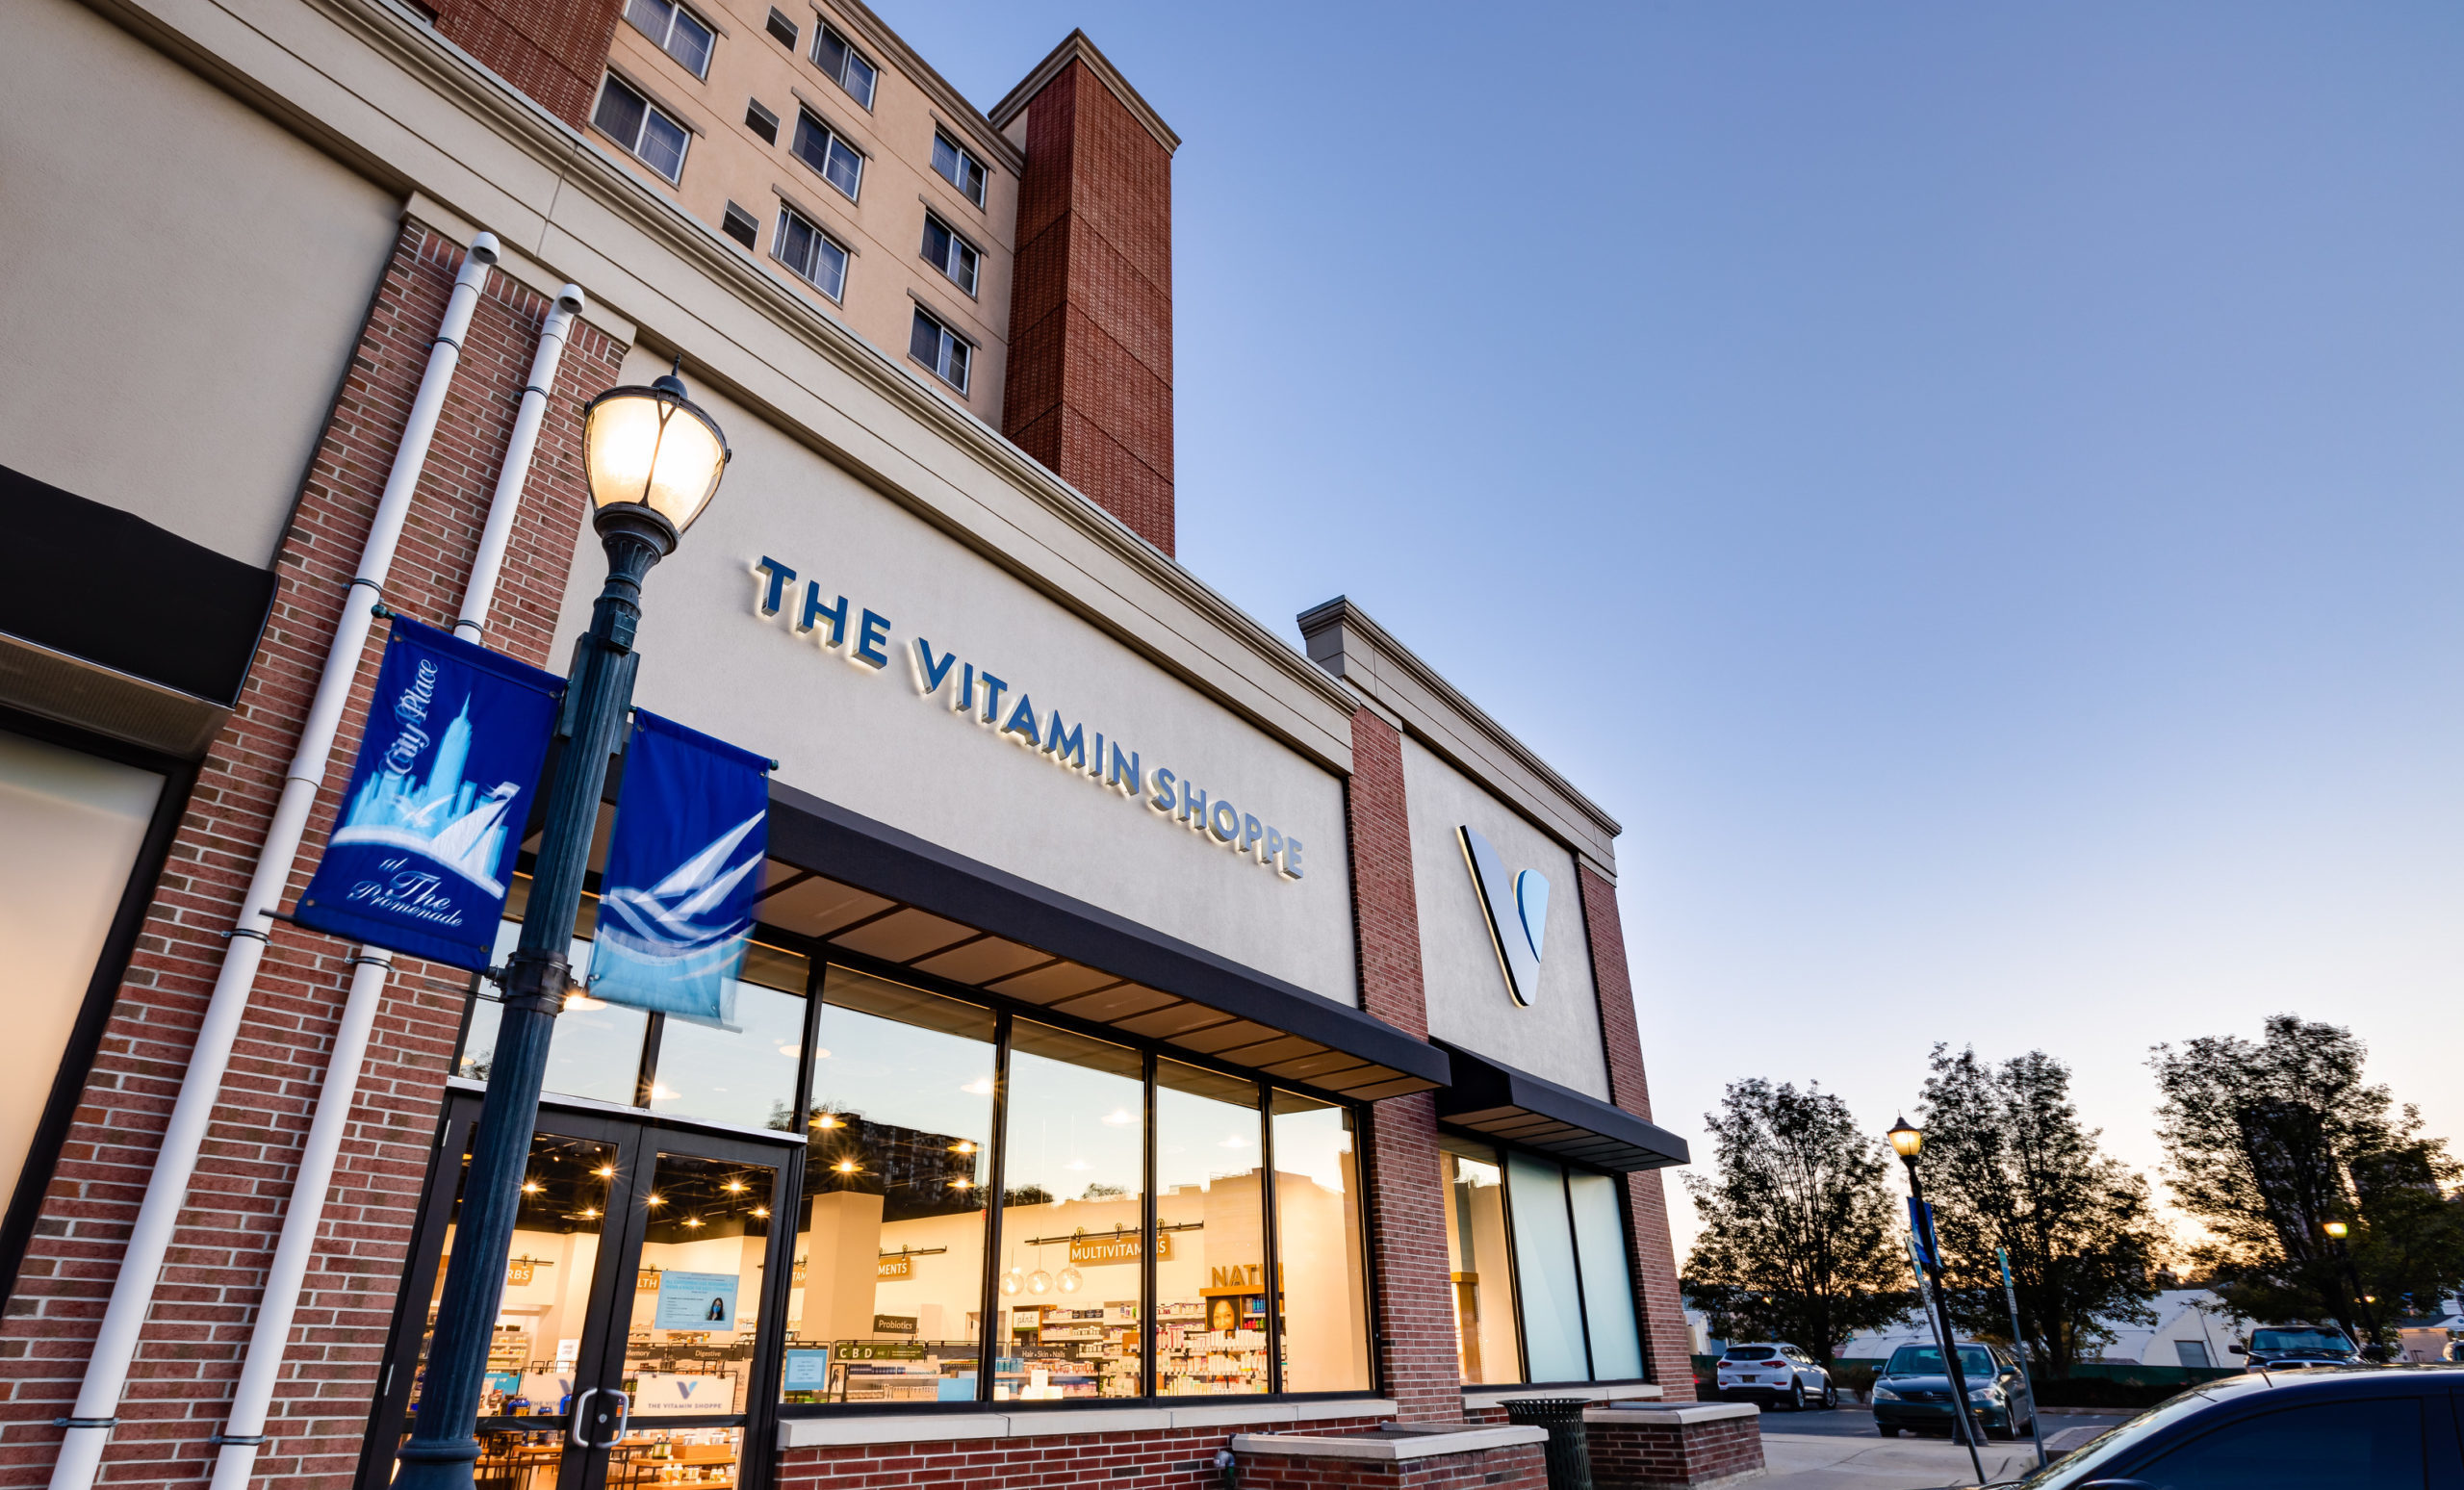 The Vitamin Shoppe adds profit while improving their customer experience with Rokt Ecommerce